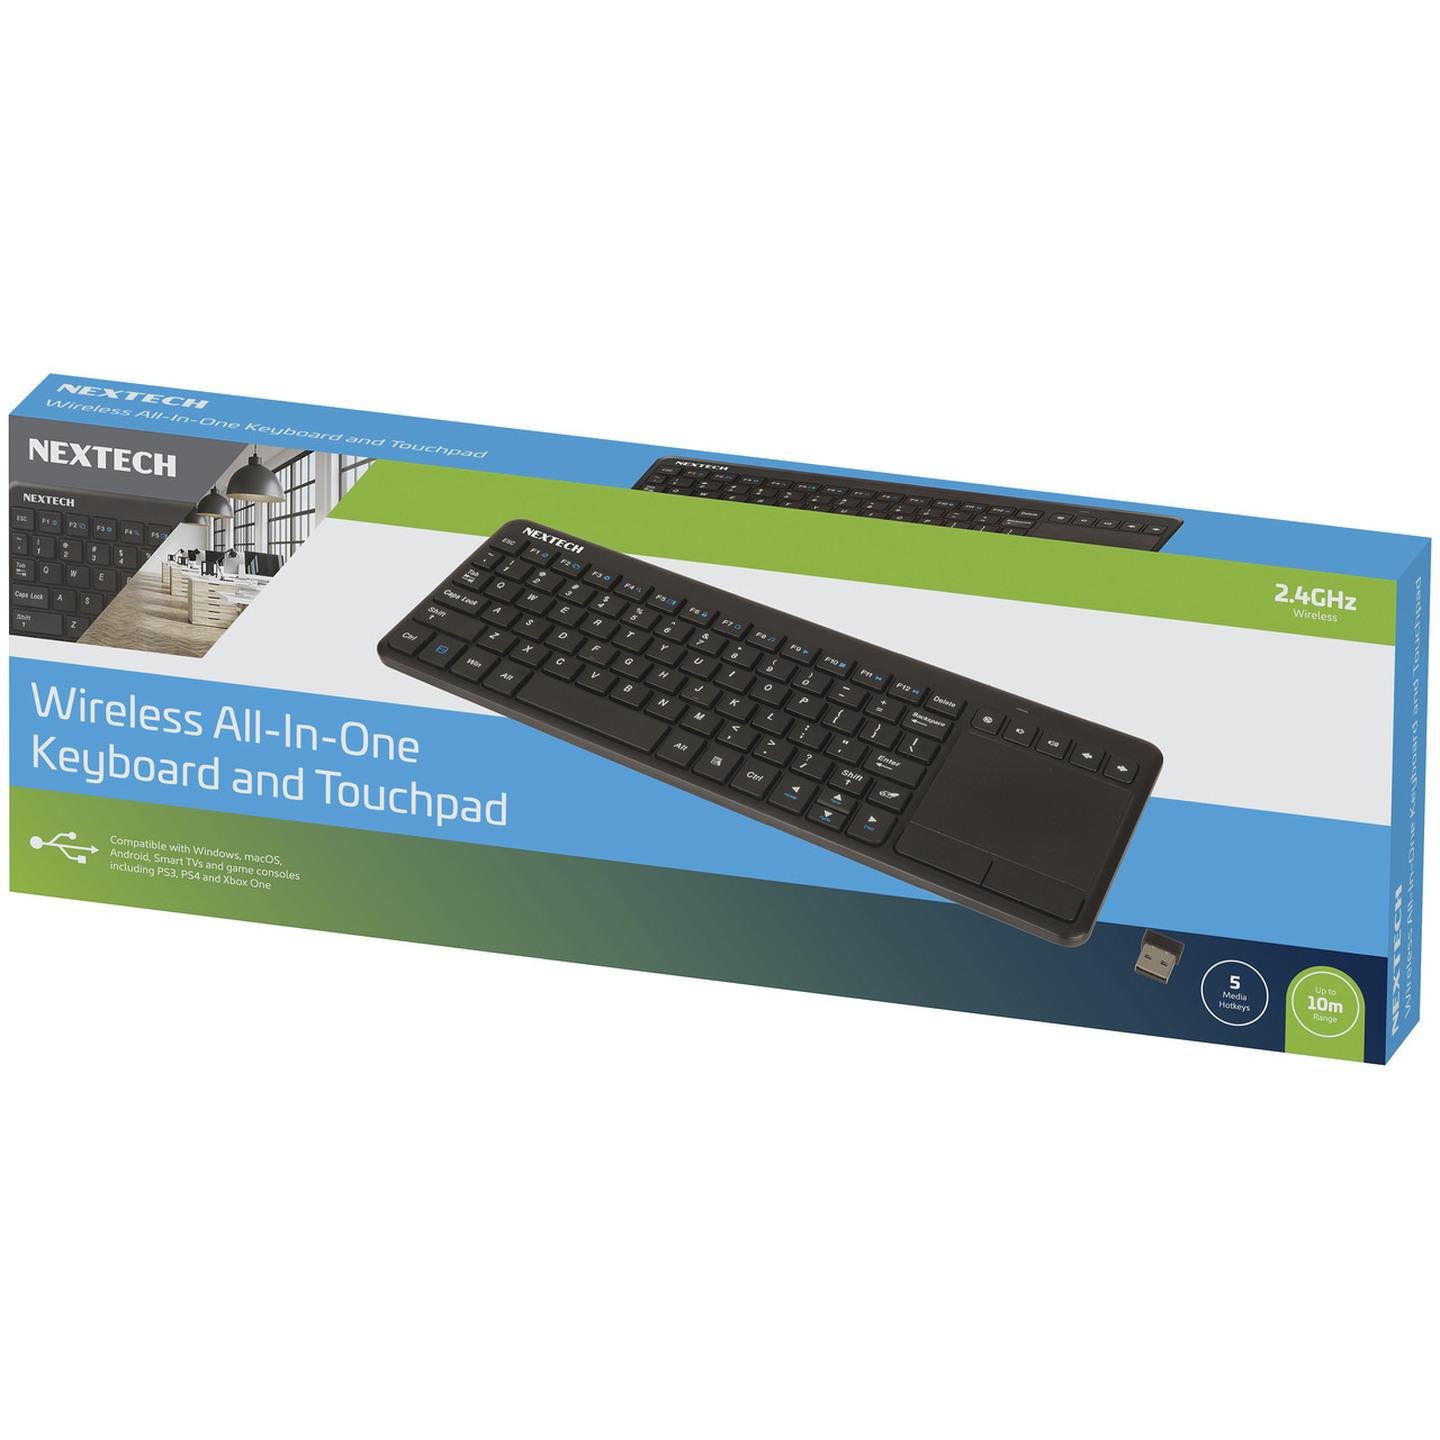 Wireless All-in-One Keyboard and Touchpad